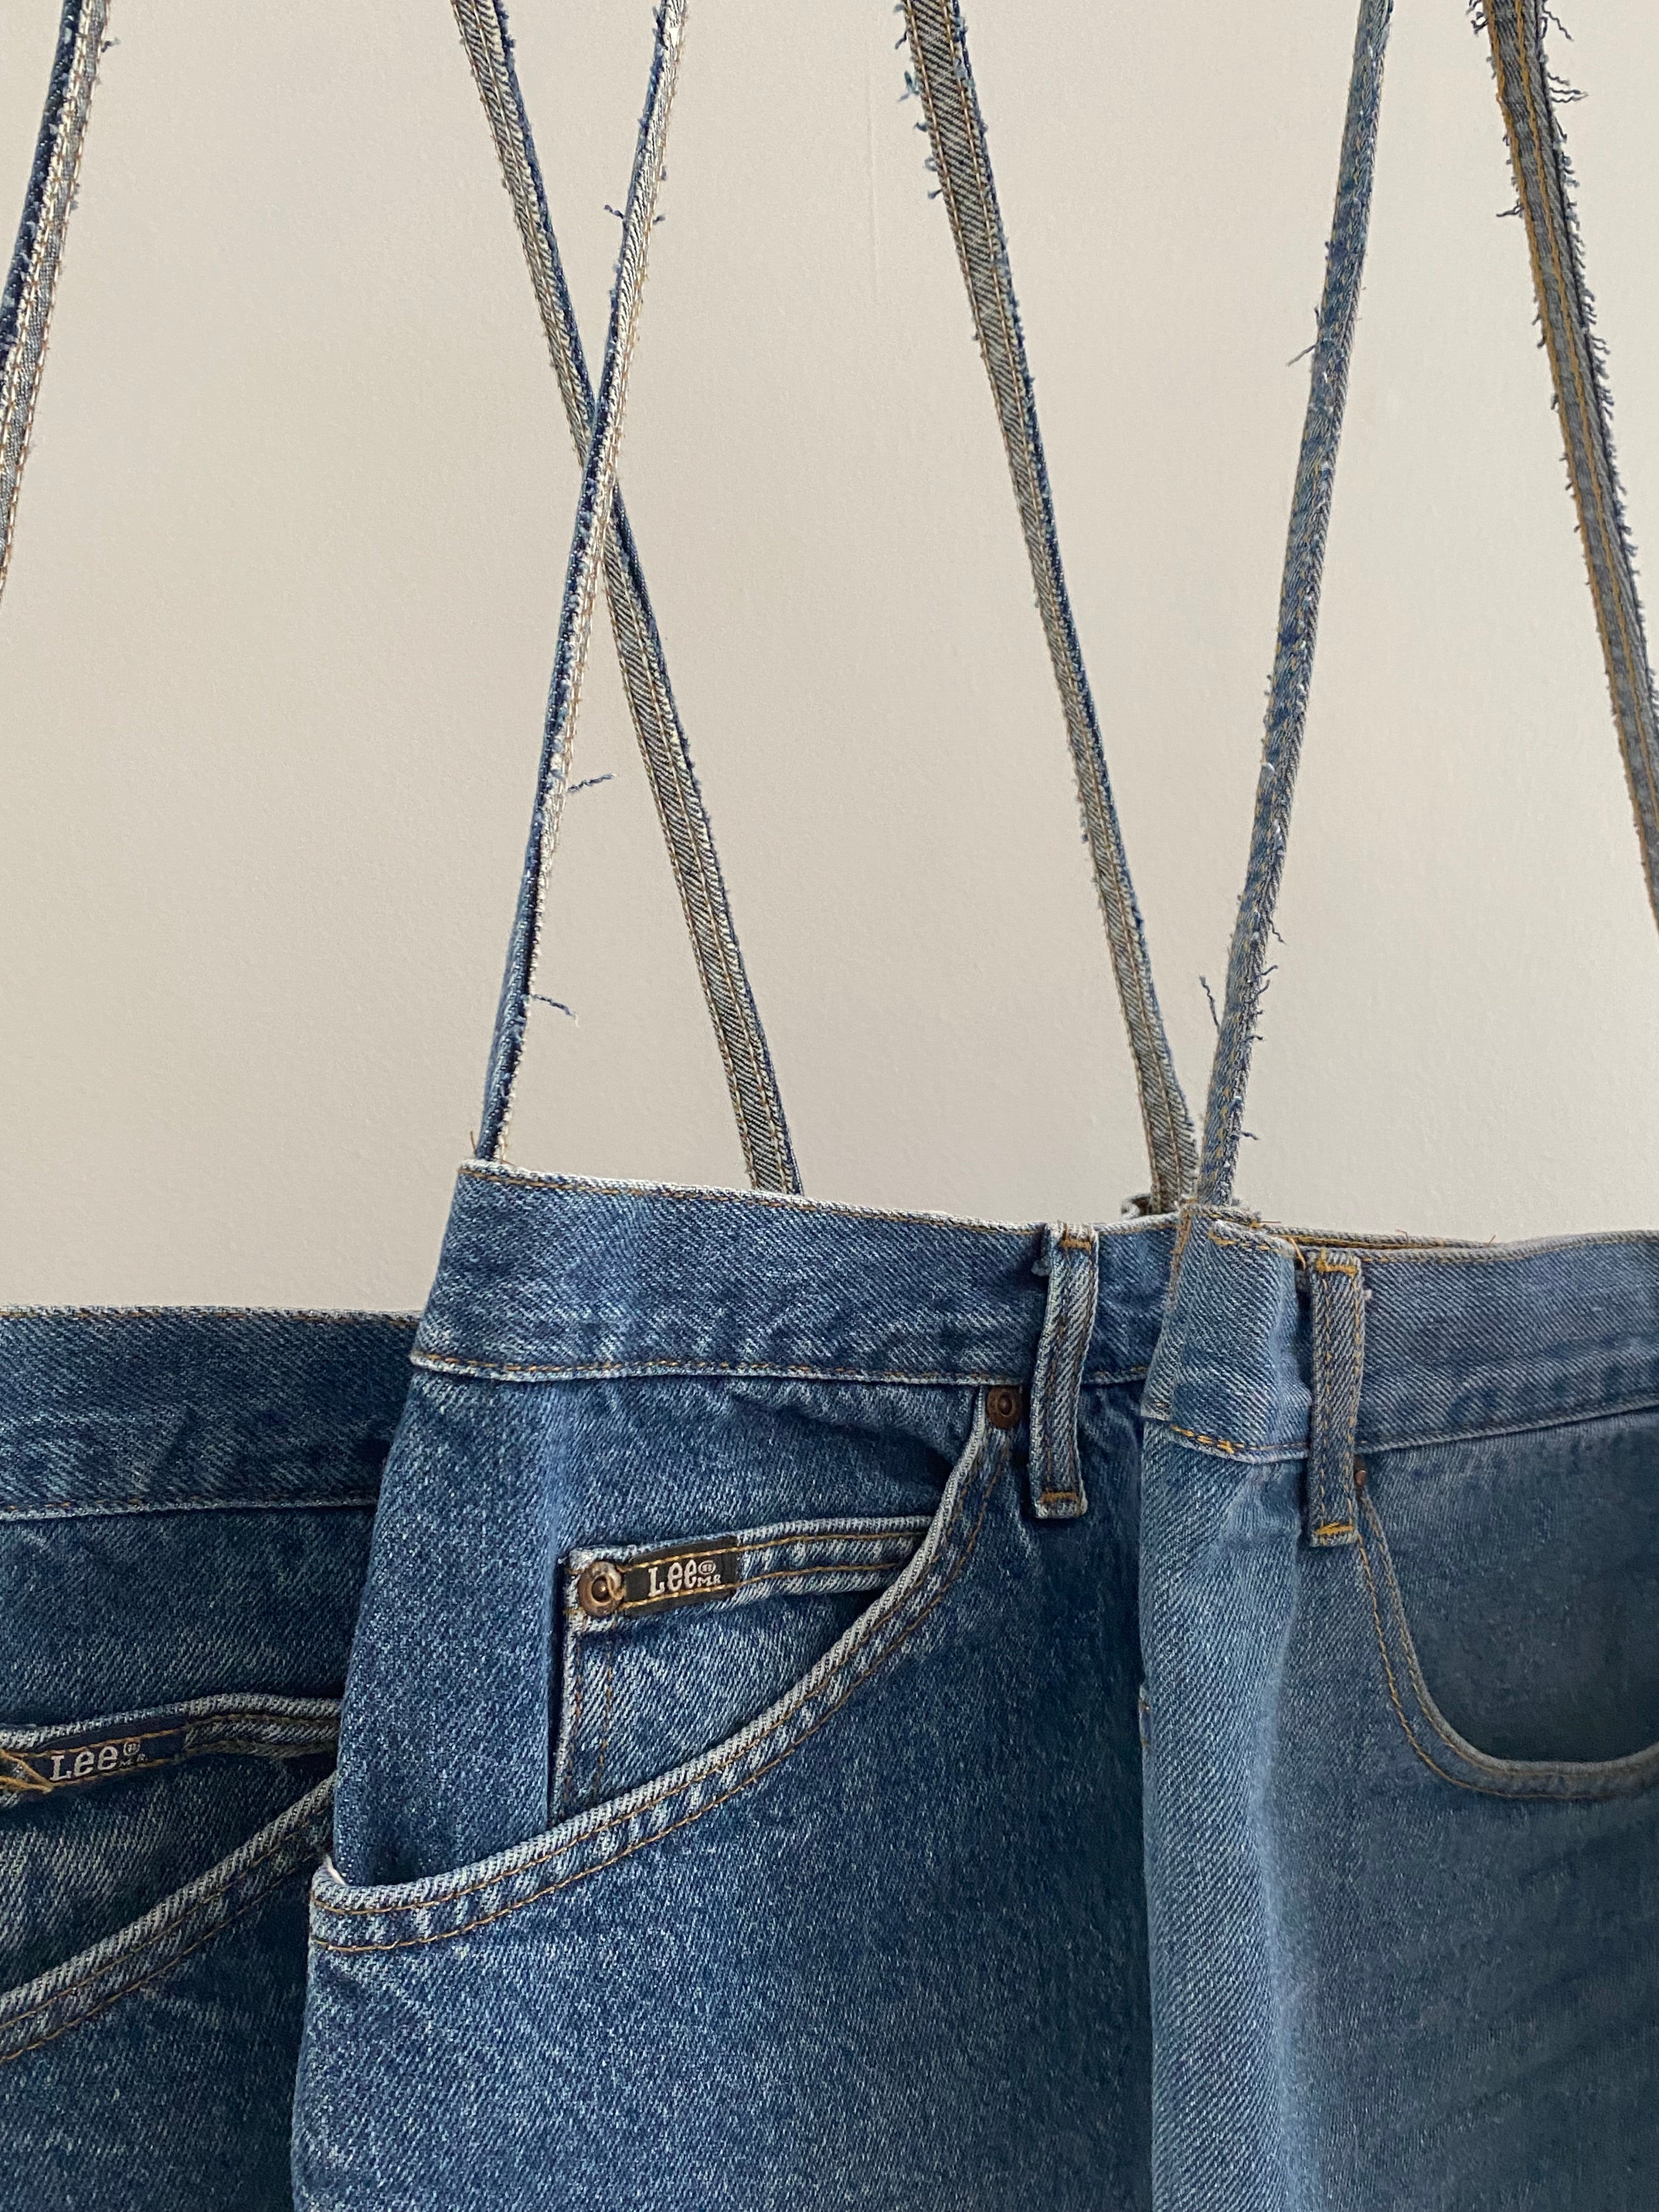 Small denim bag, handmade wallet for various essentials : r/upcycling